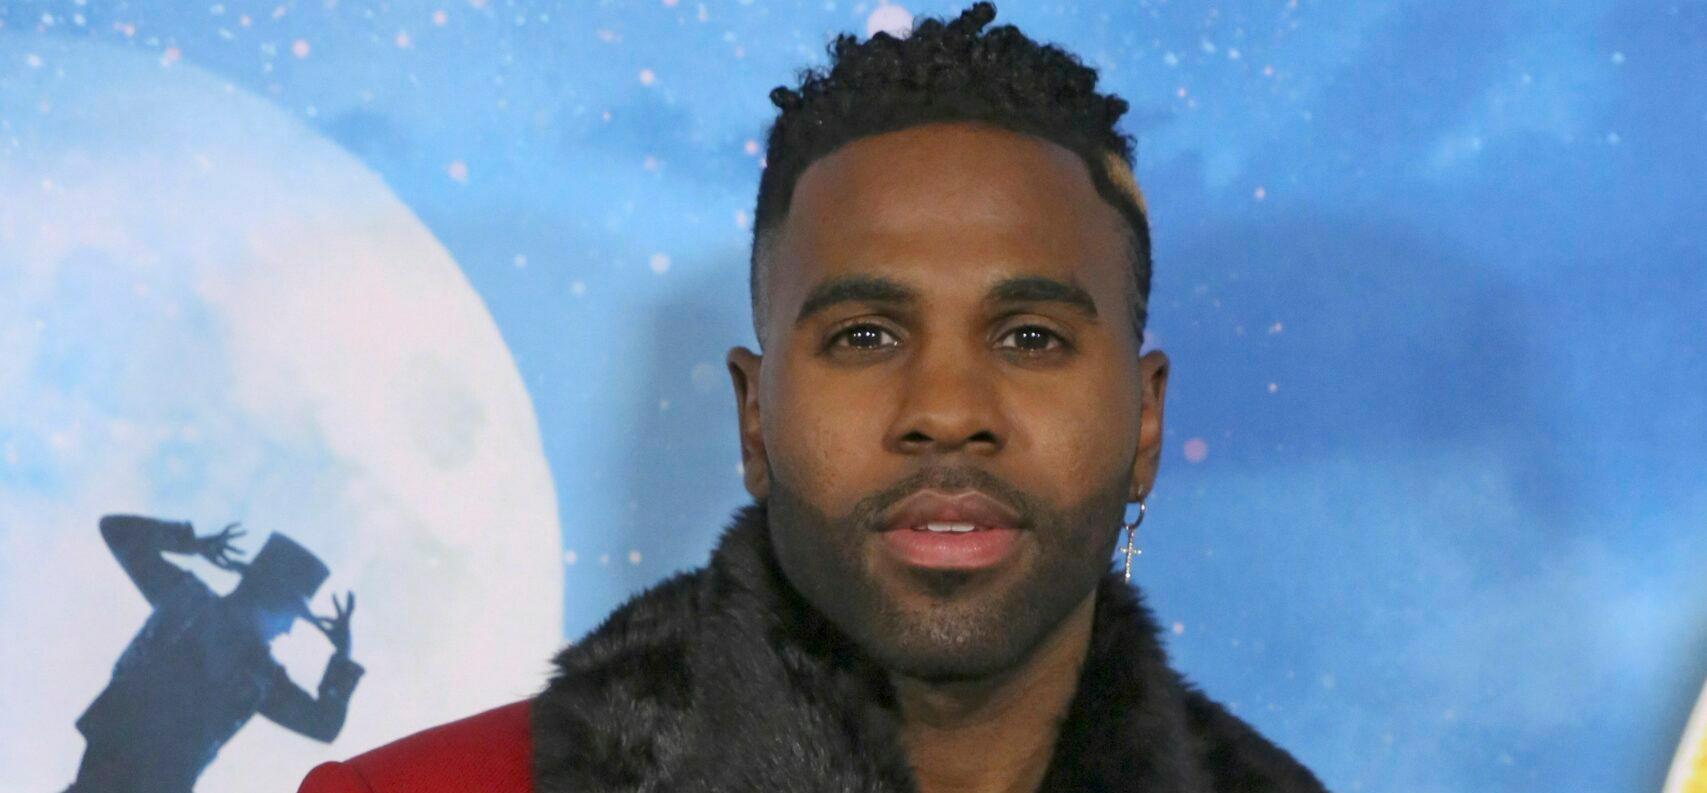 Jason Derulo Surprises Waiter With Huge Tip: ‘You Just Paid For Semester Of College’